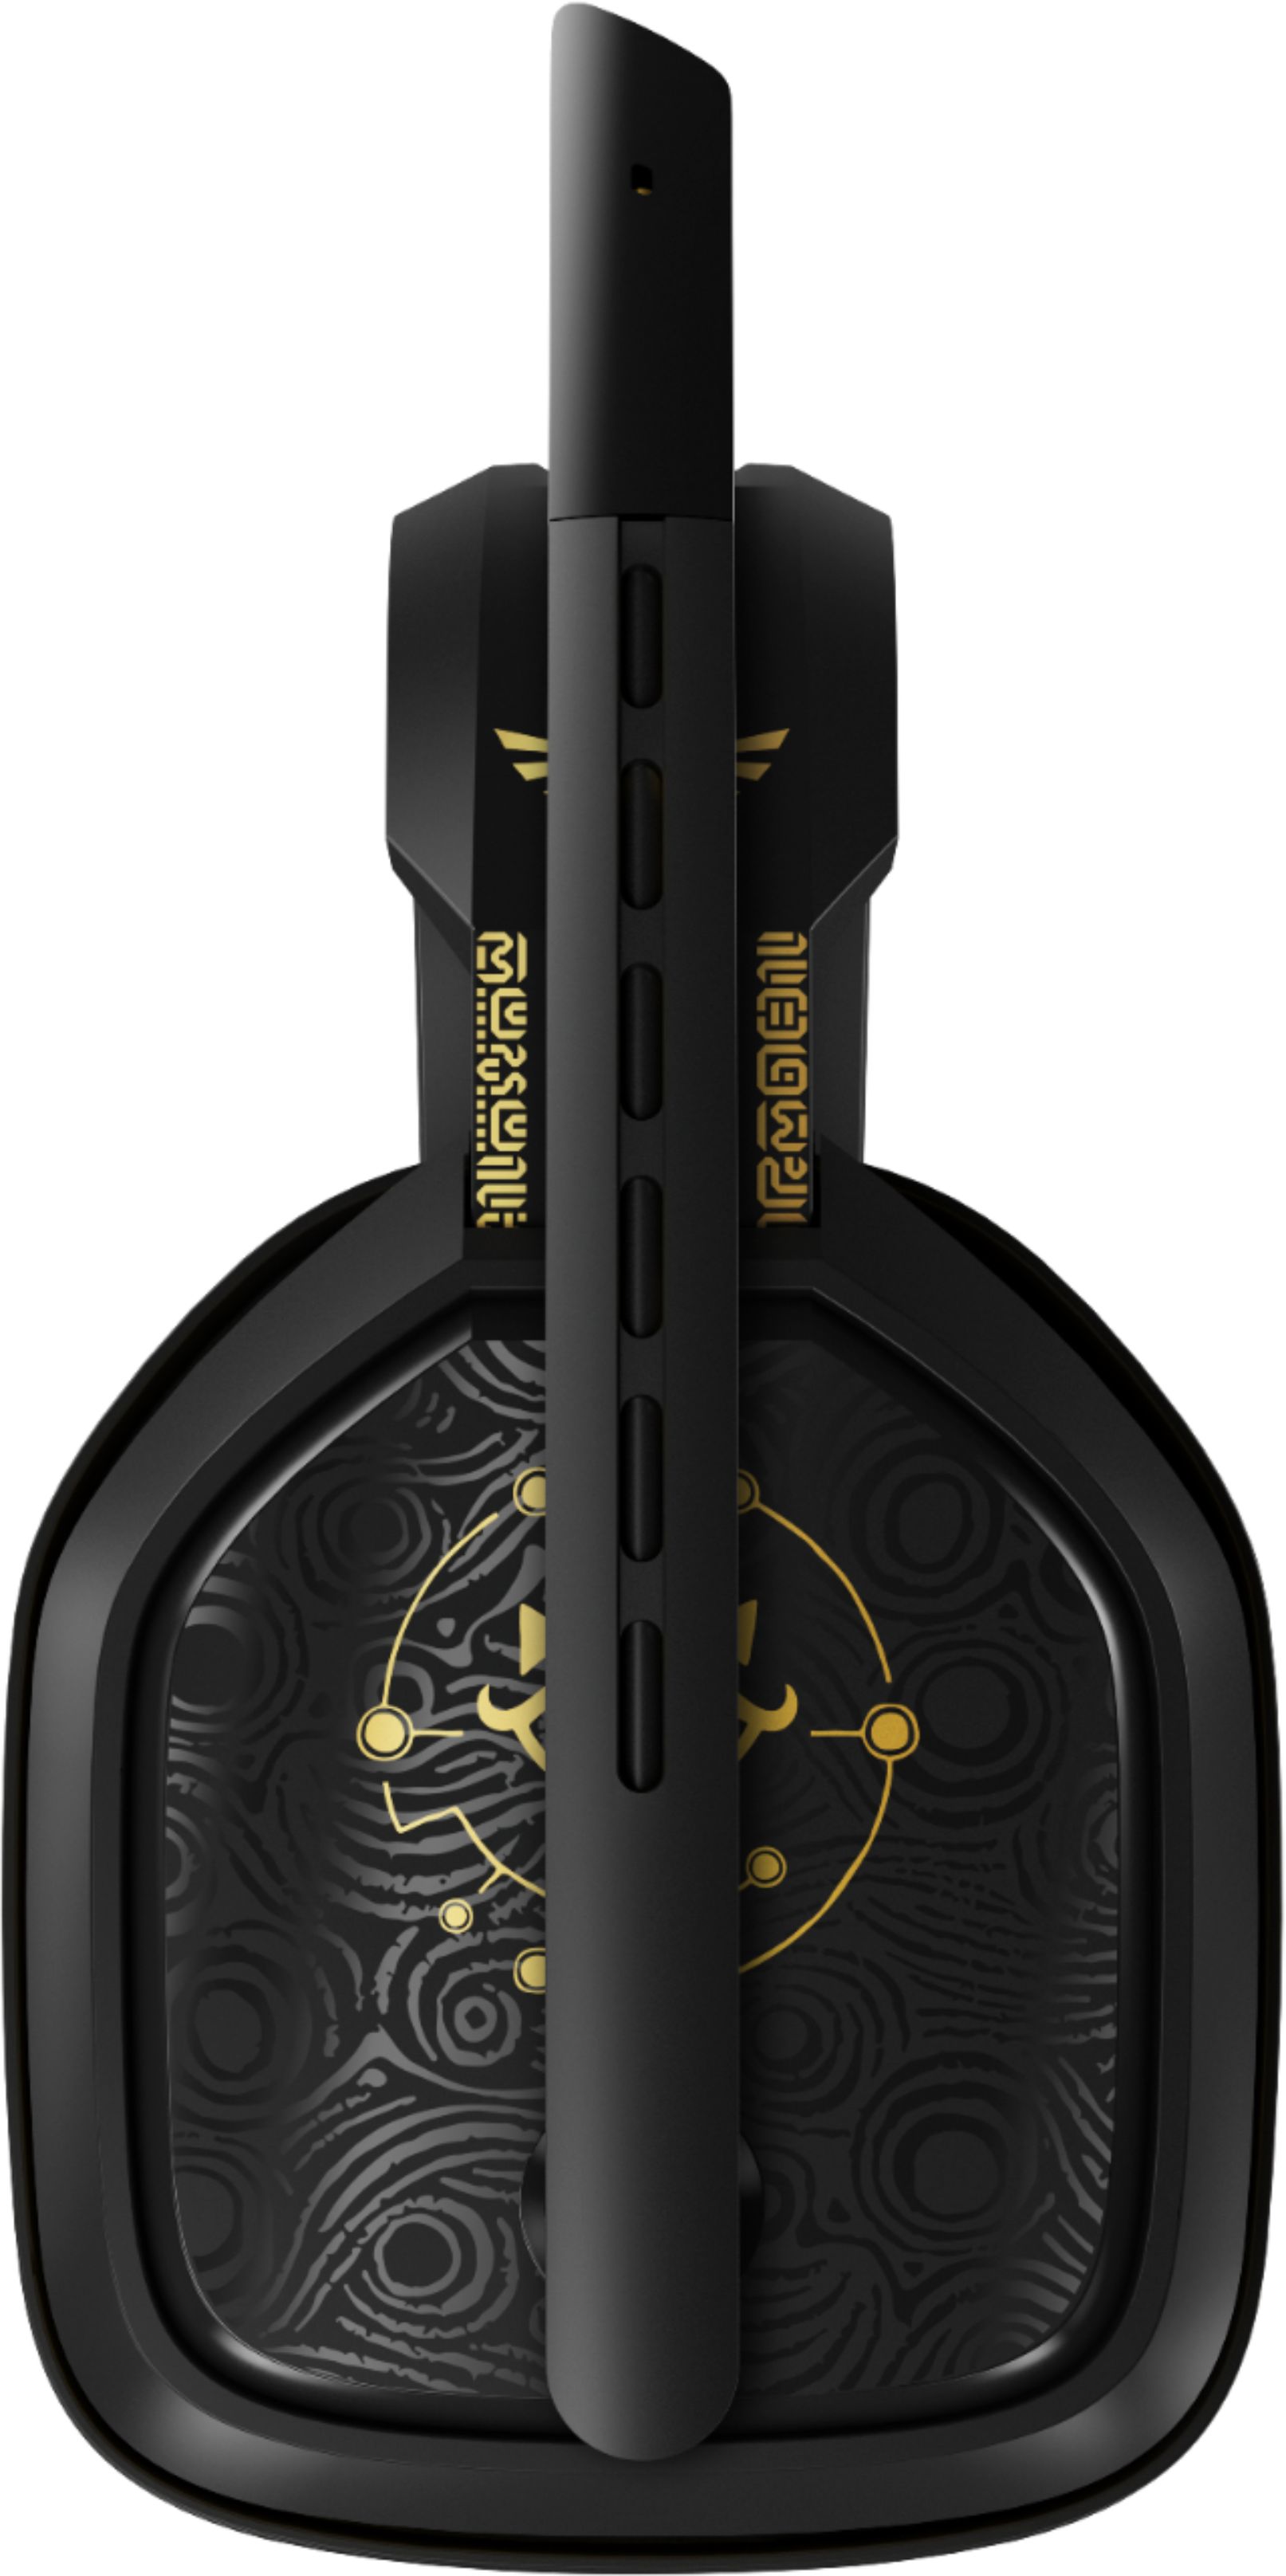 Customer Reviews Astro Gaming A10 Wired Stereo Gaming Headset Legend Of Zelda 939 Best Buy